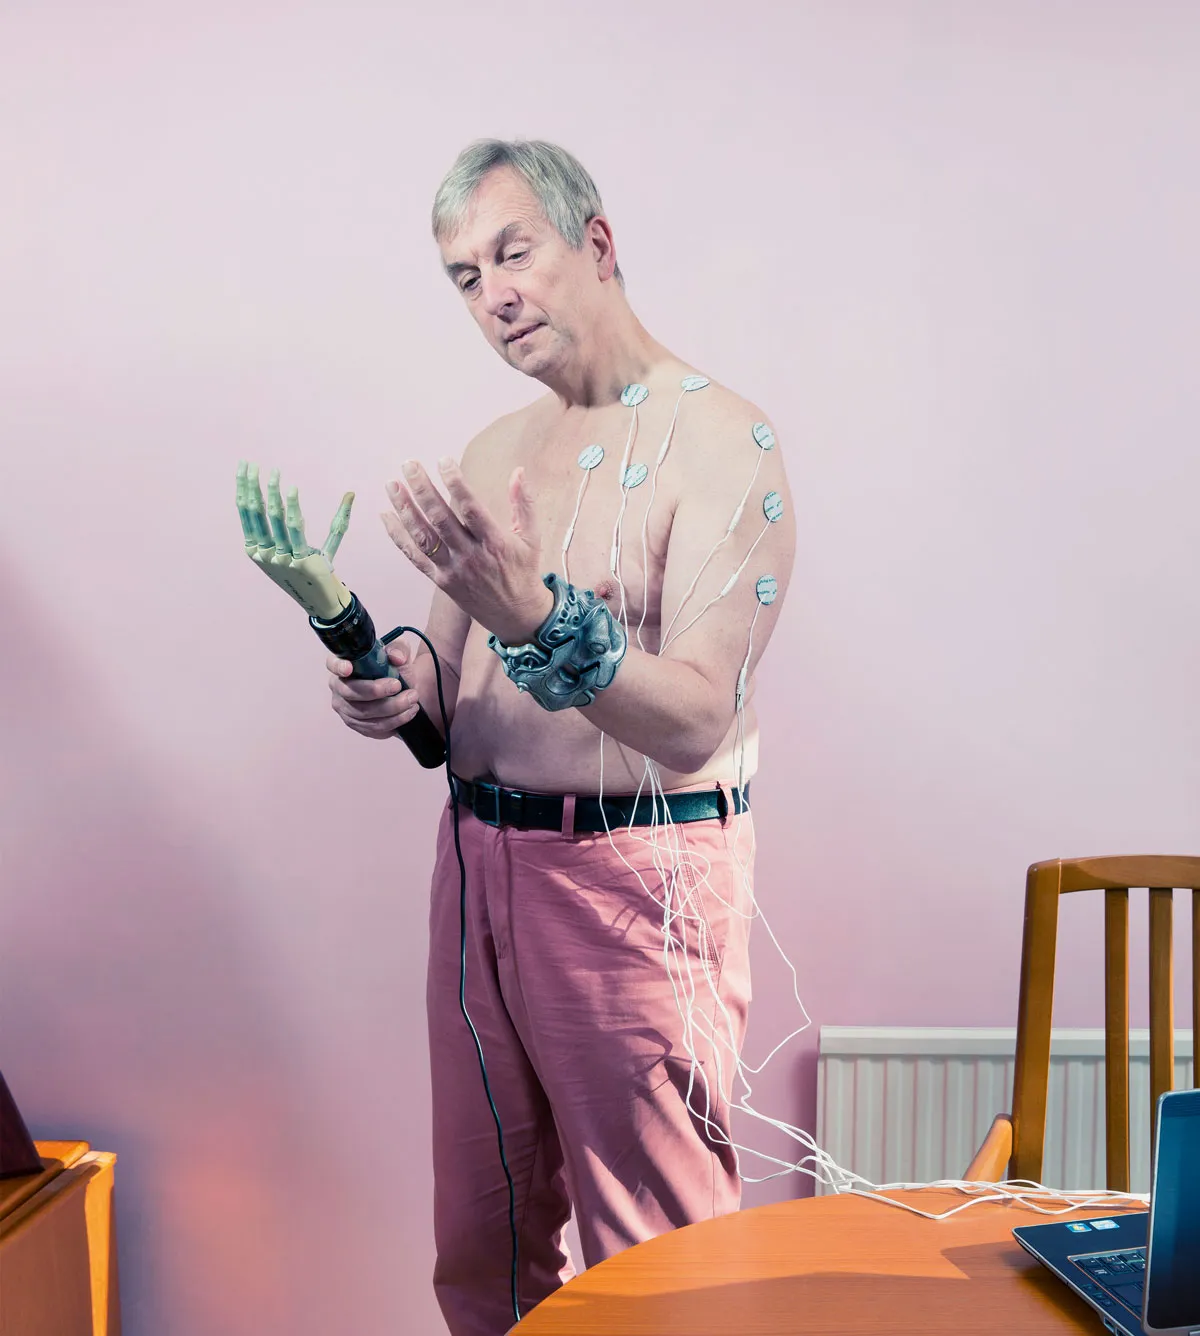 Kevin Warwick, considered by many to be the world’s first cyborg, had a neural system implanted that allowed him to control a robotic hand via his brain signals from anywhere in the world. © David Vintiner